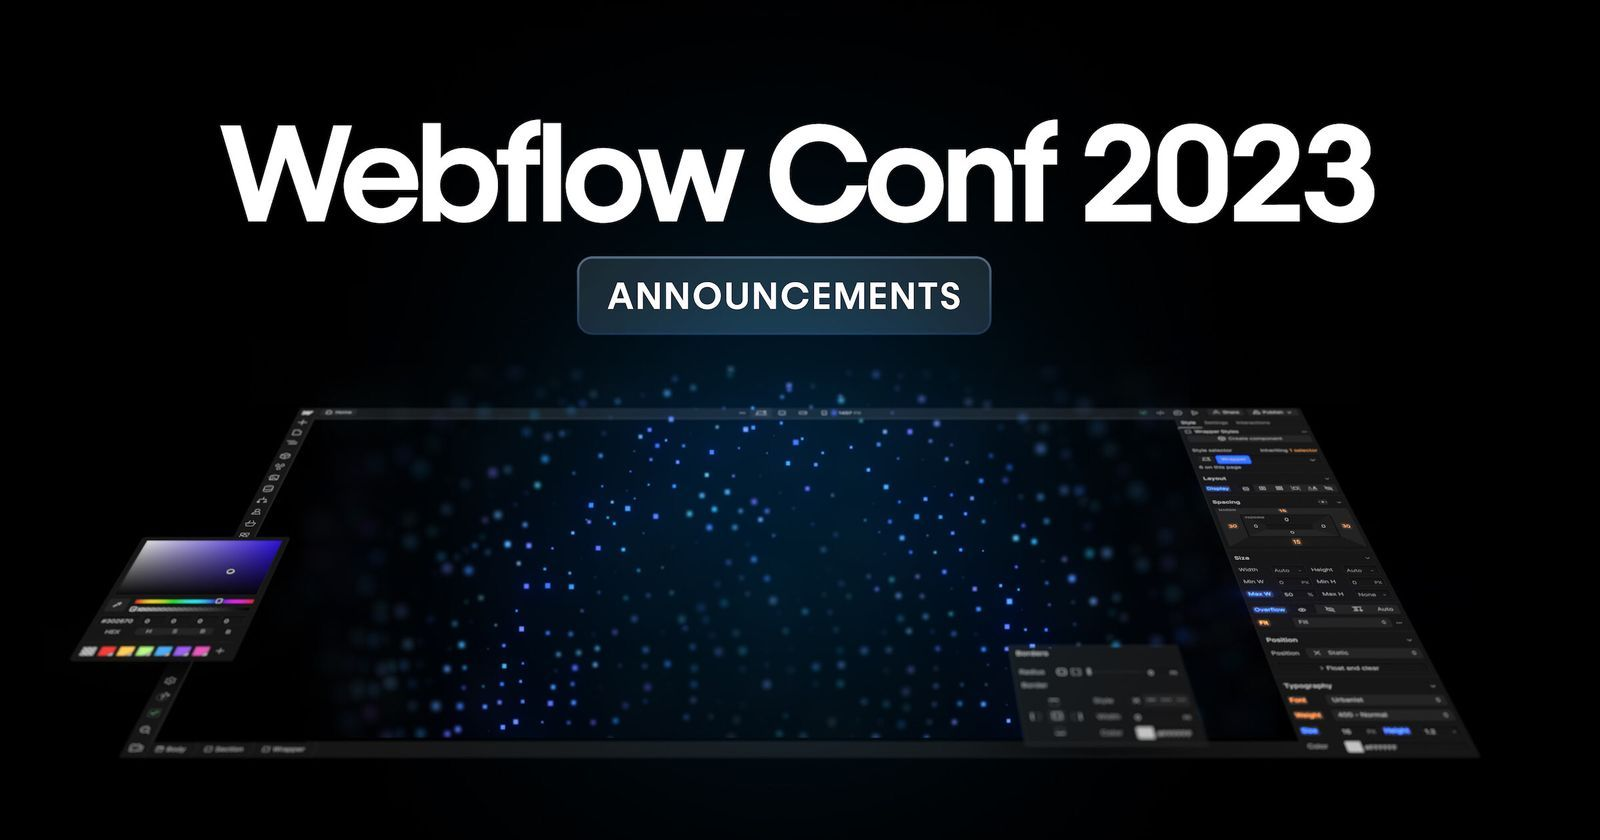 No Code review 2023 – Webflow conf 2023